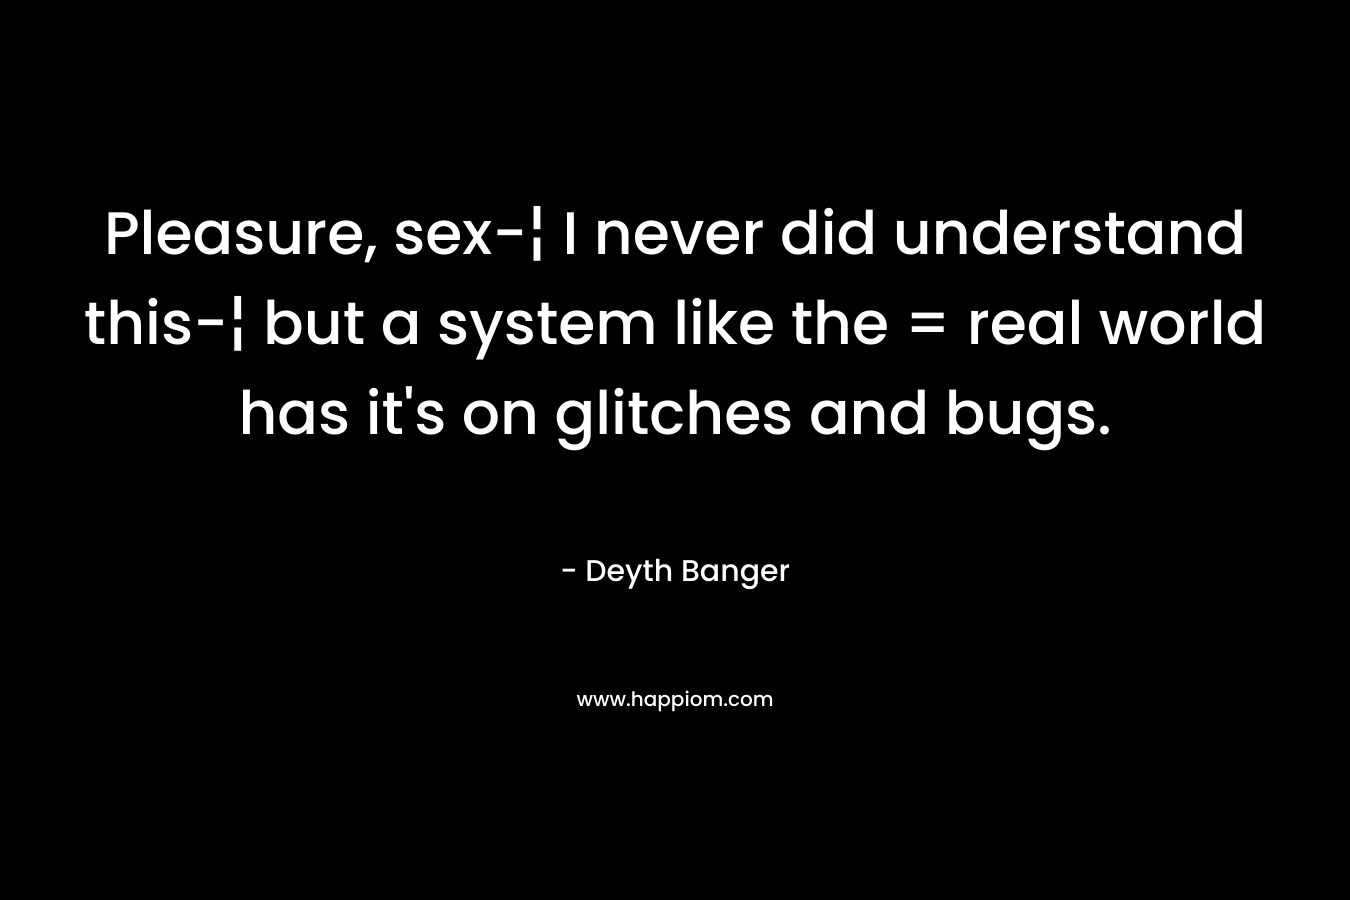 Pleasure, sex-¦ I never did understand this-¦ but a system like the = real world has it’s on glitches and bugs. – Deyth Banger